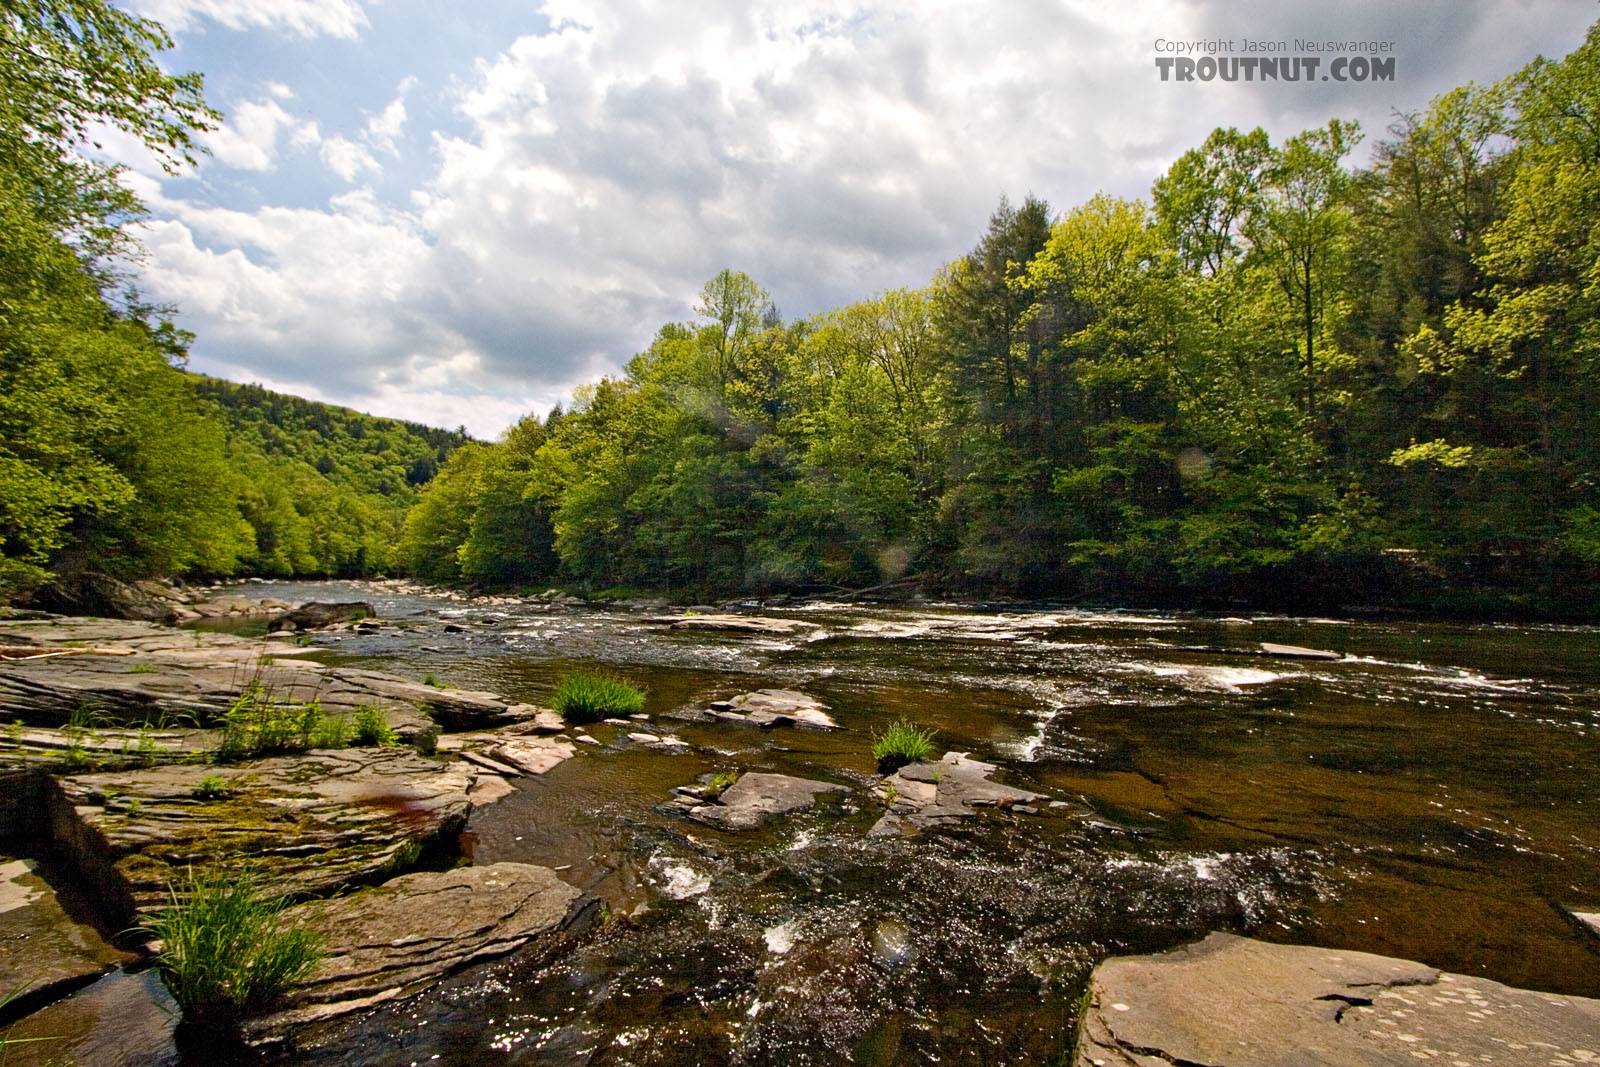  From the Neversink River Gorge in New York.